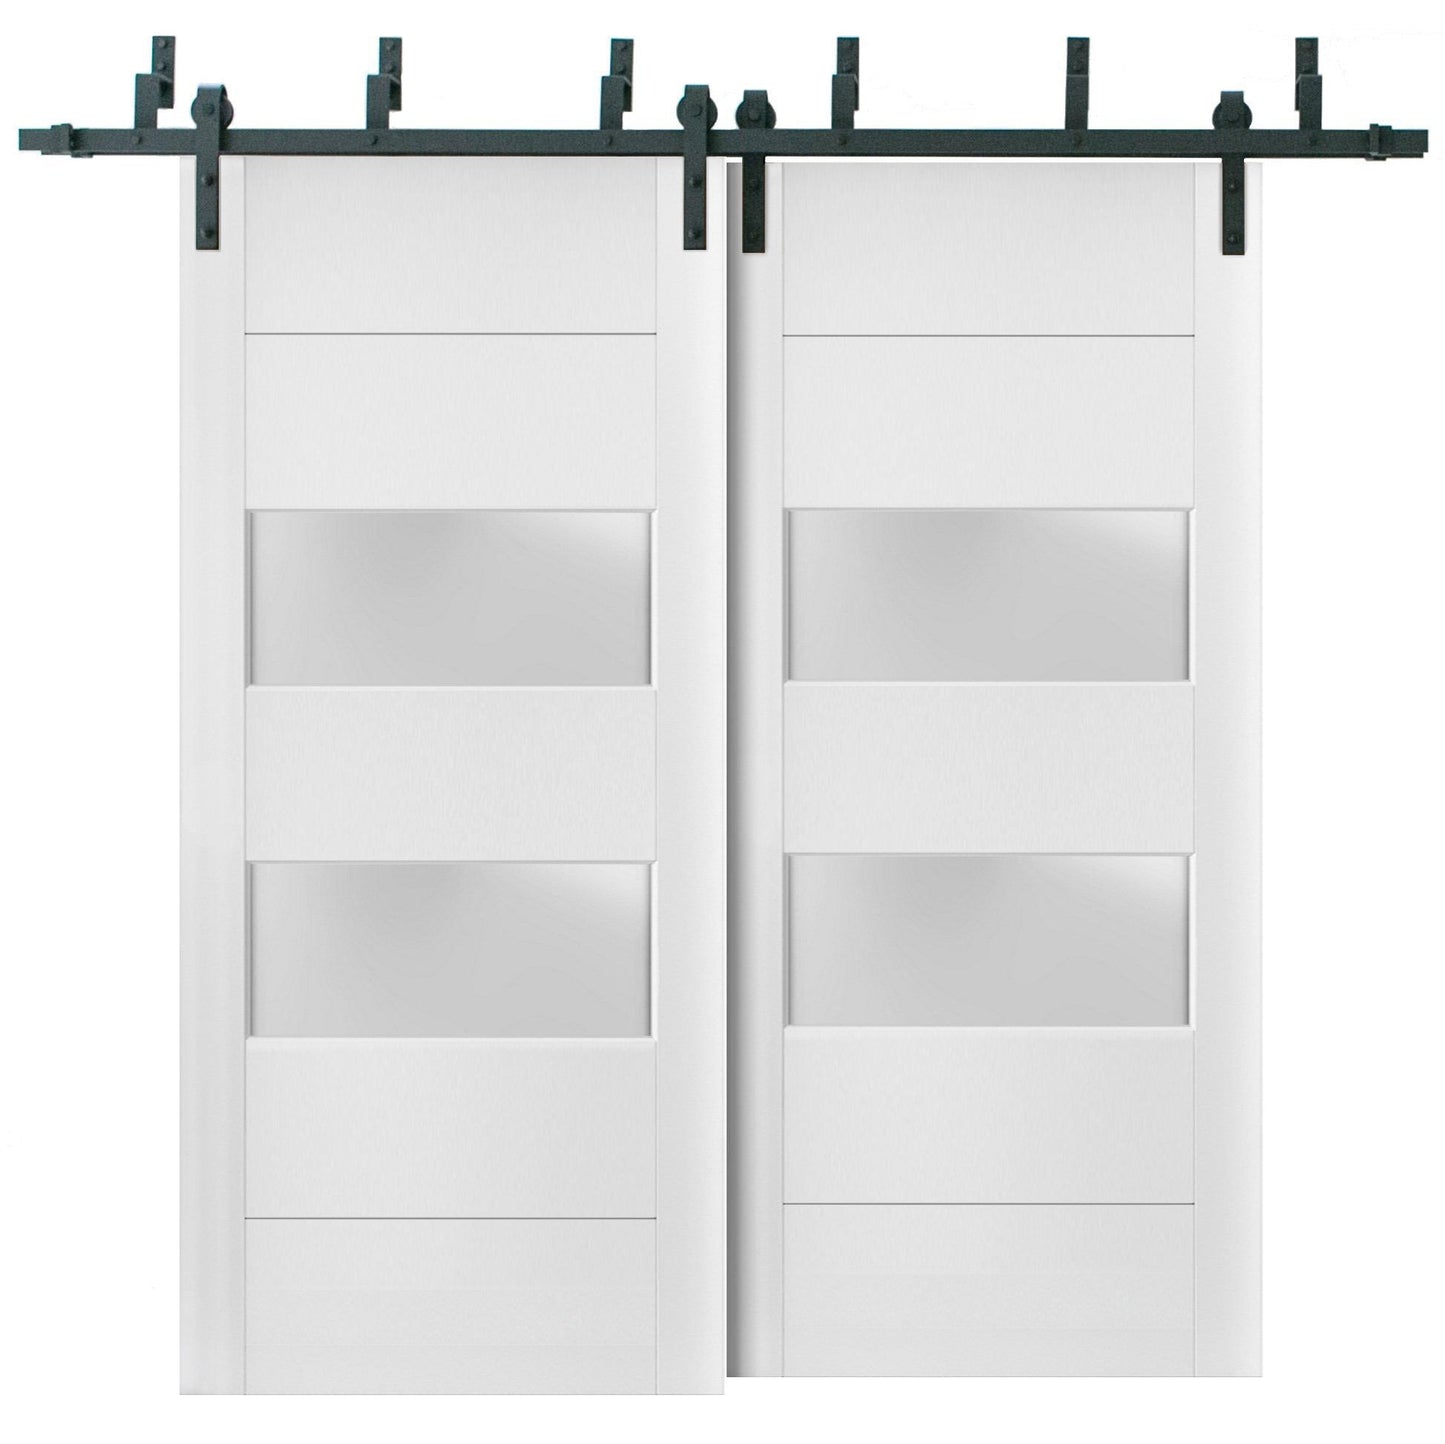 Lucia 4010 White Silk Double Barn Door with 2 Lites Frosted Glass | Black Bypass Rails